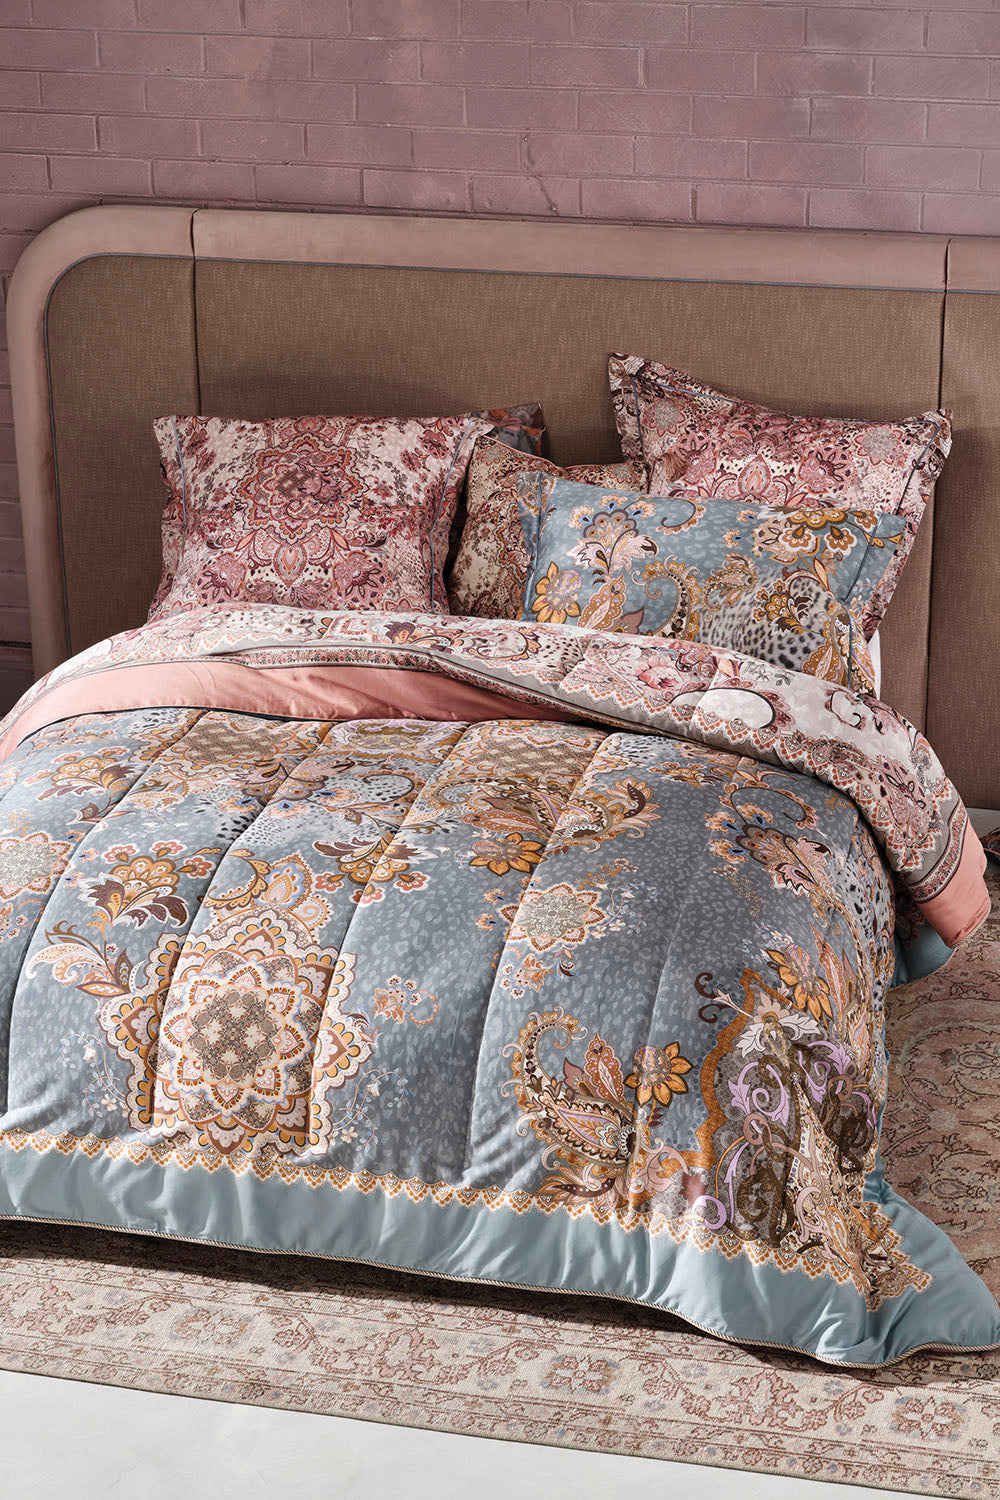 QUILTED BED COVER LE PALAIS DU ZAHIR